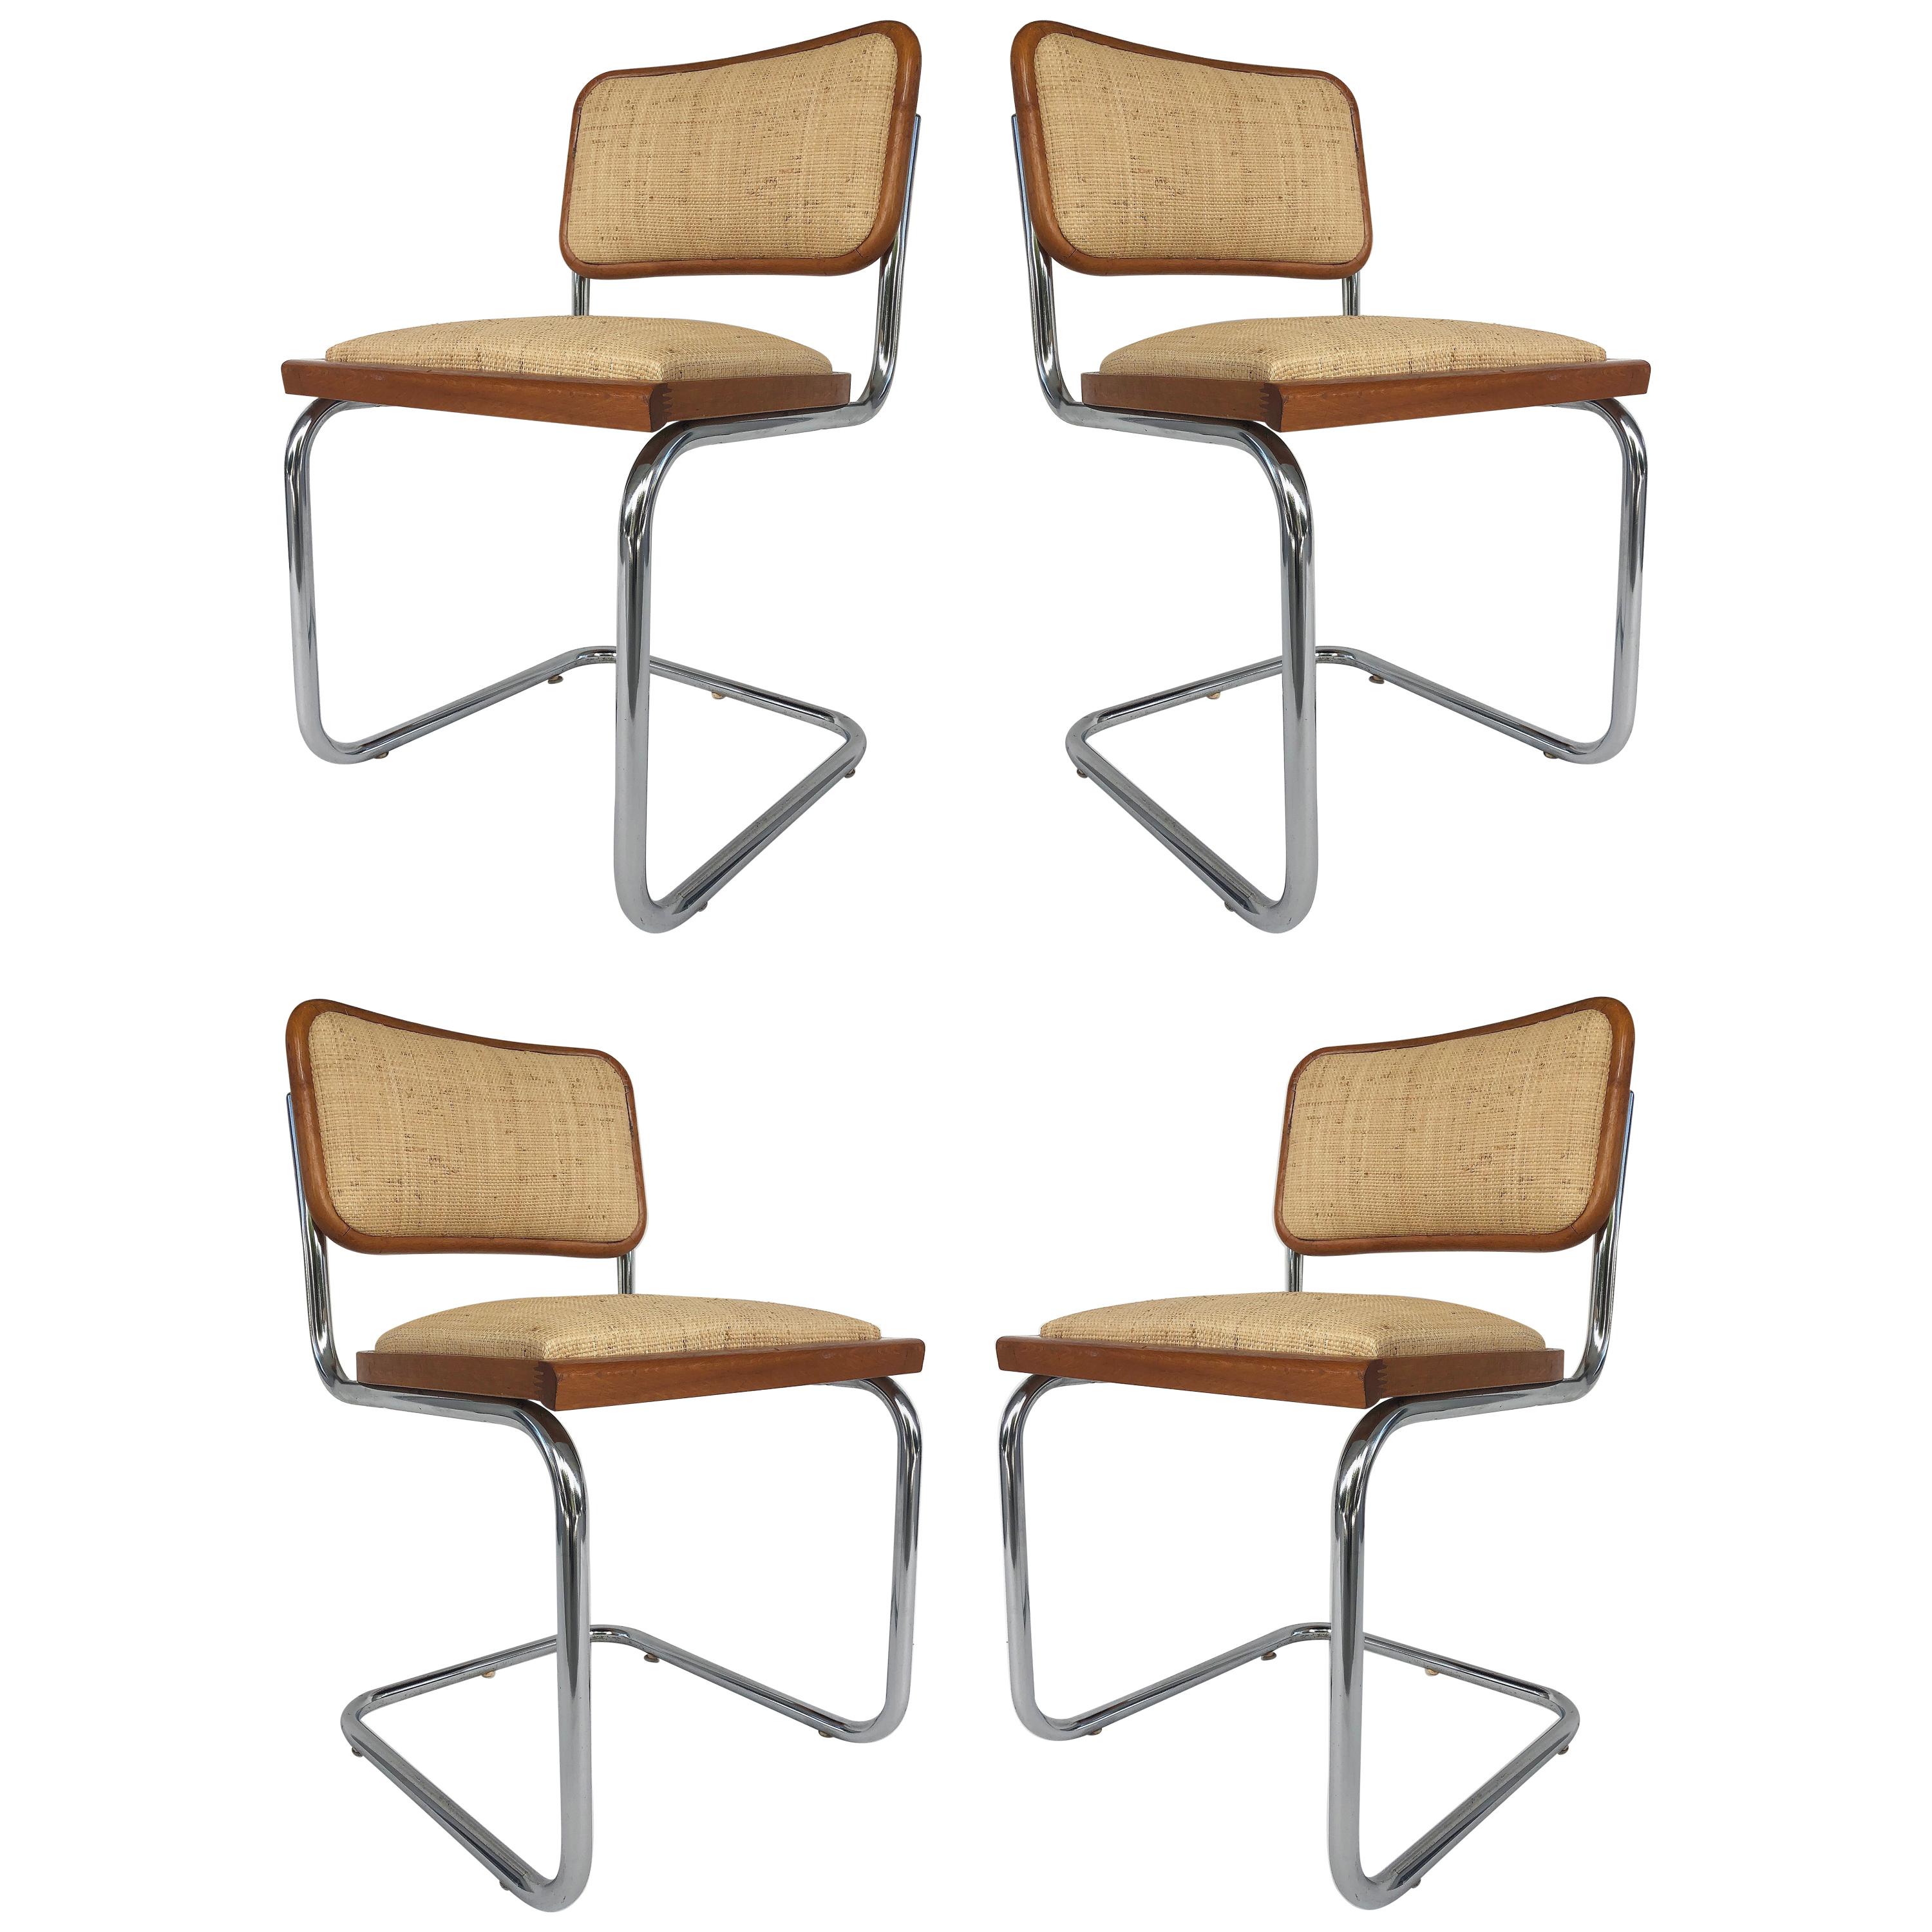 Marcel Breuer Knoll Chrome Cesca Chairs Upholstered in Raffia, Set of Four